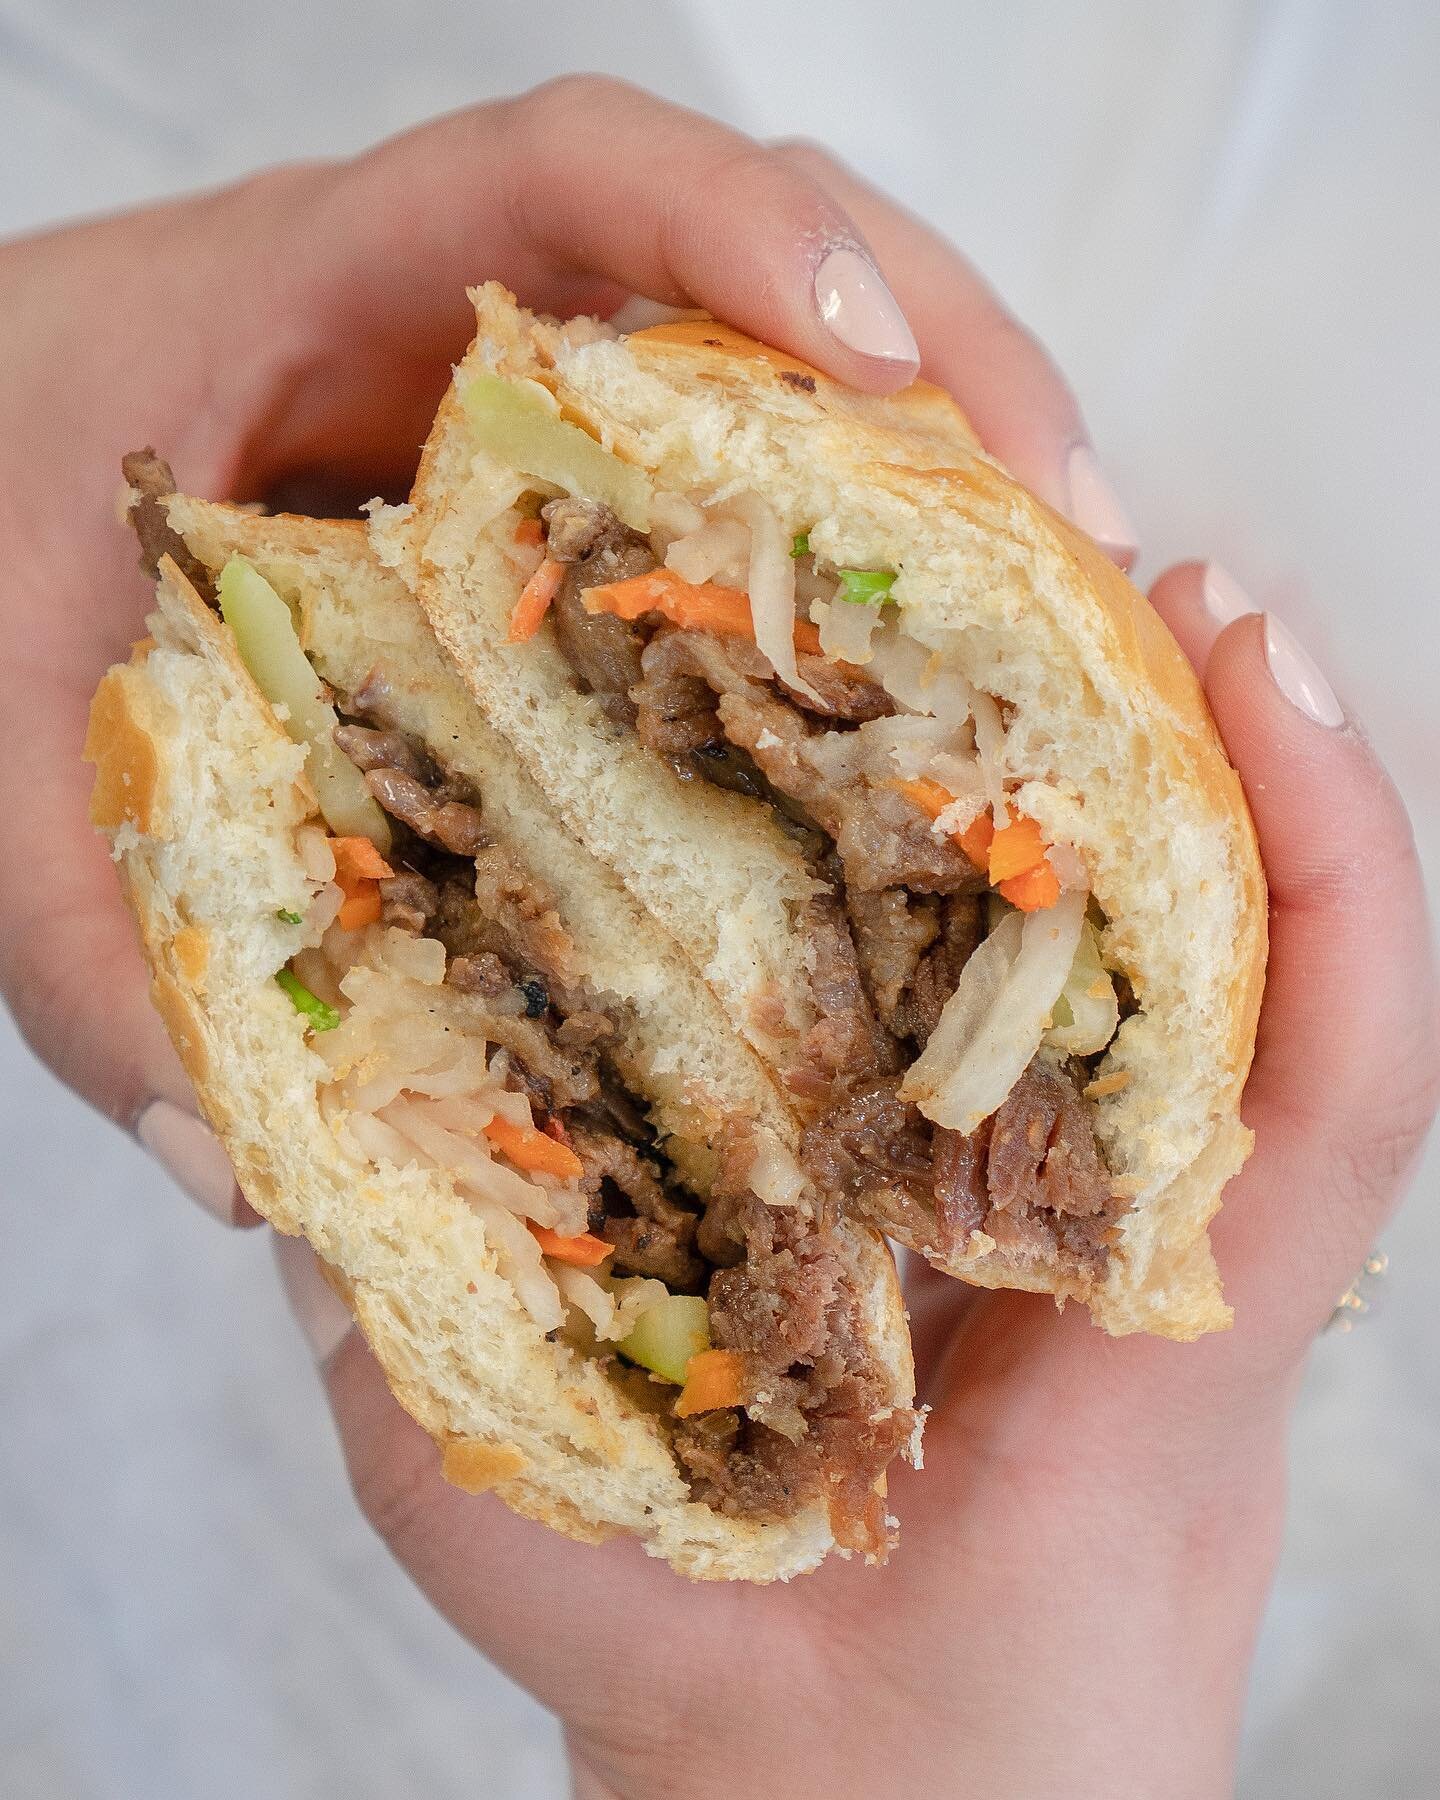 📍 Edmonds - Yeh Yeh&rsquo;s

Dine in and takeout 

What we ordered: 
- Grilled Pork Banh Mi

One of our favorite banh mis in the Greater Seattle Area can be found in Edmonds, WA in a little hole in the wall spot right off high way 99! It&rsquo;s a b